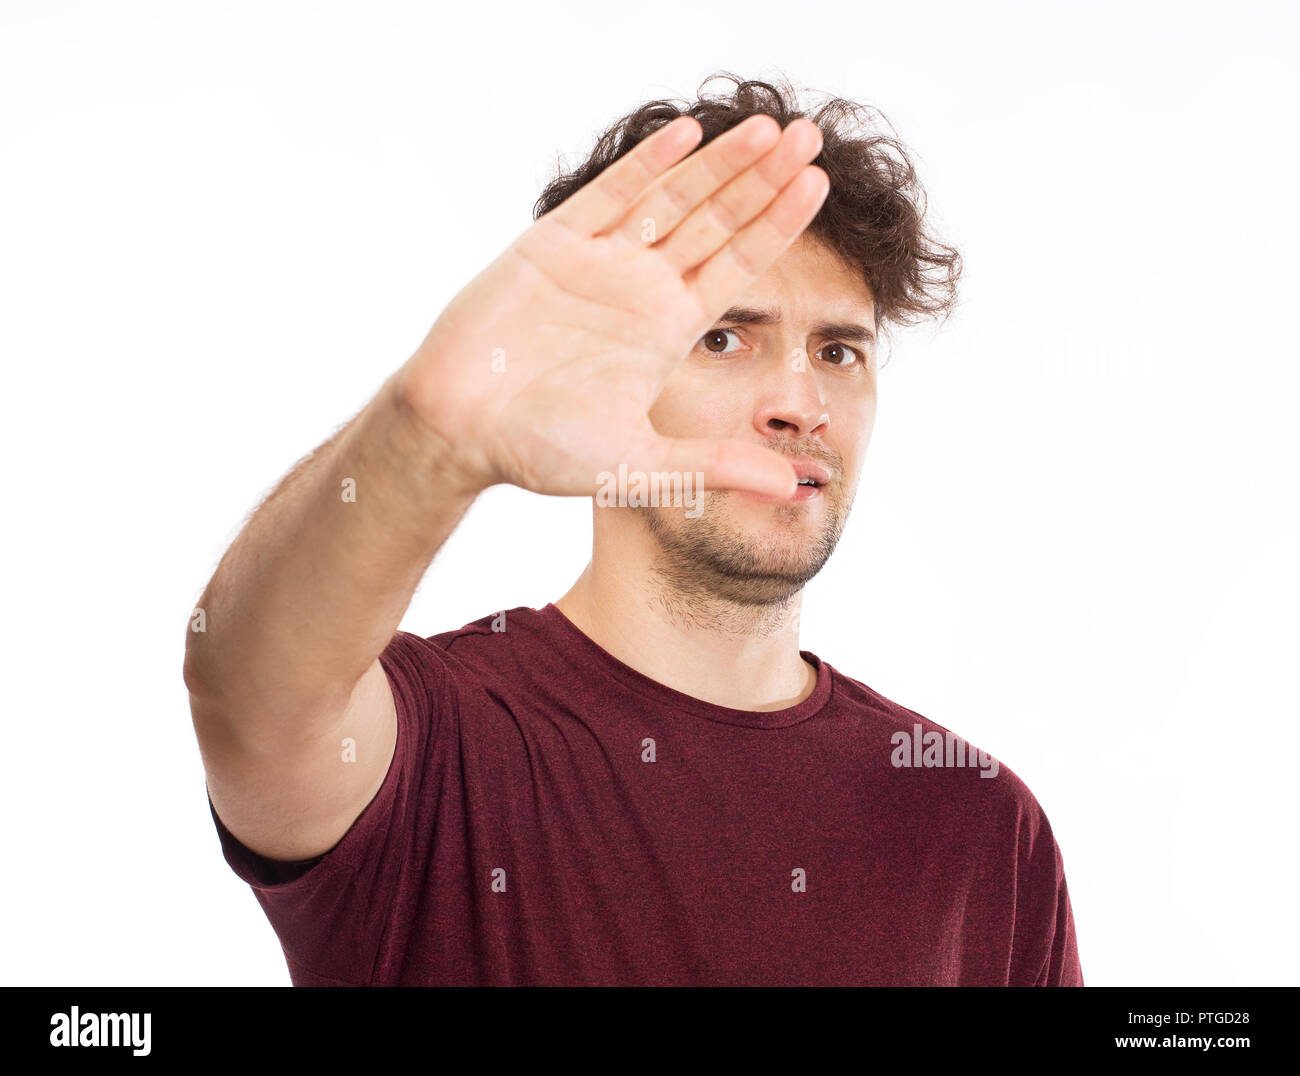 Young man covering his eyes by hands Stock Photo